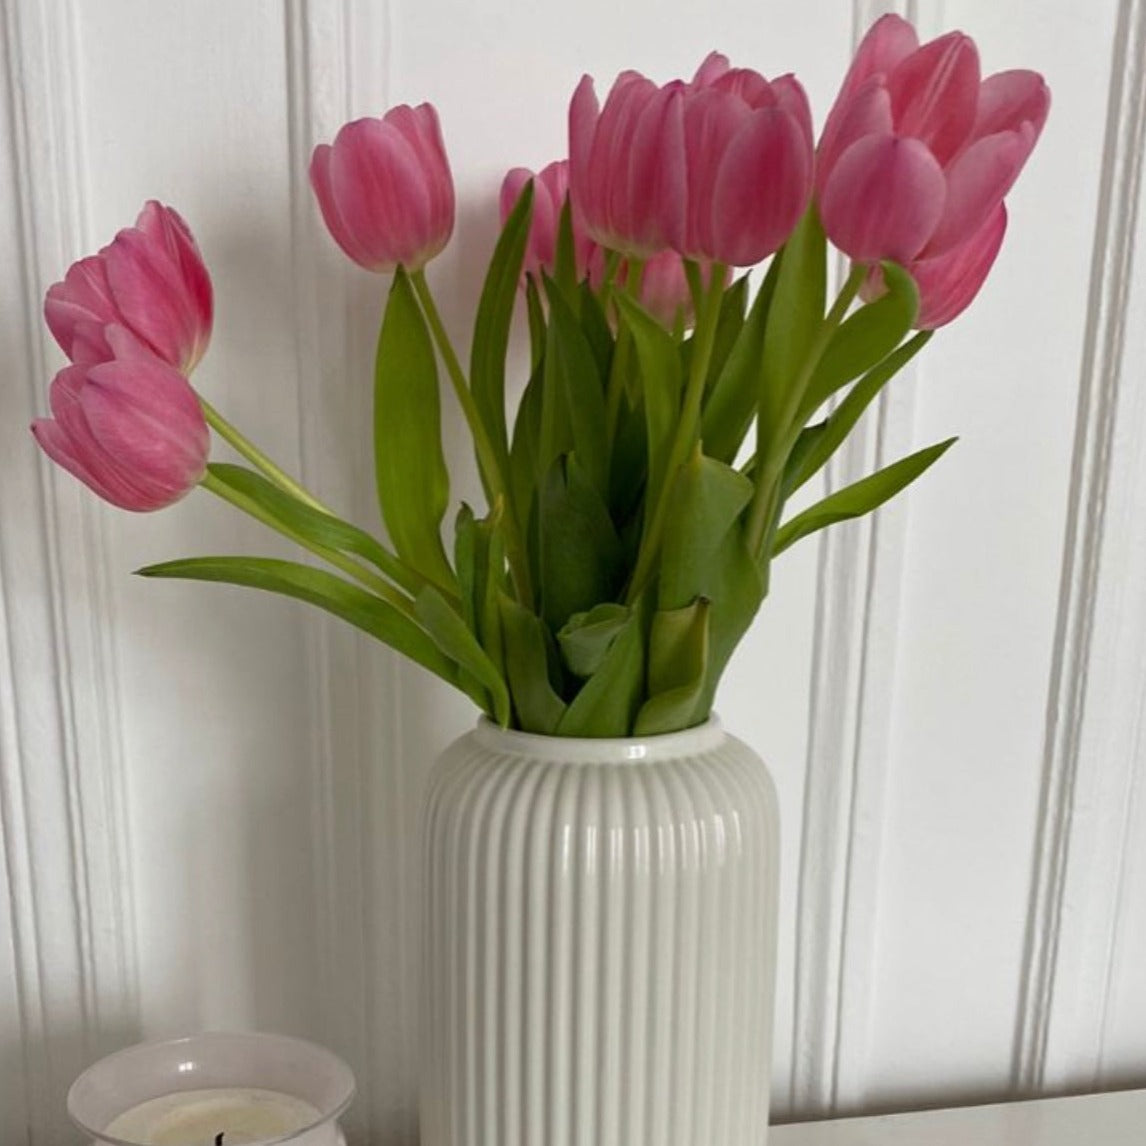 Tulips in a Vase - The Bloom Room 